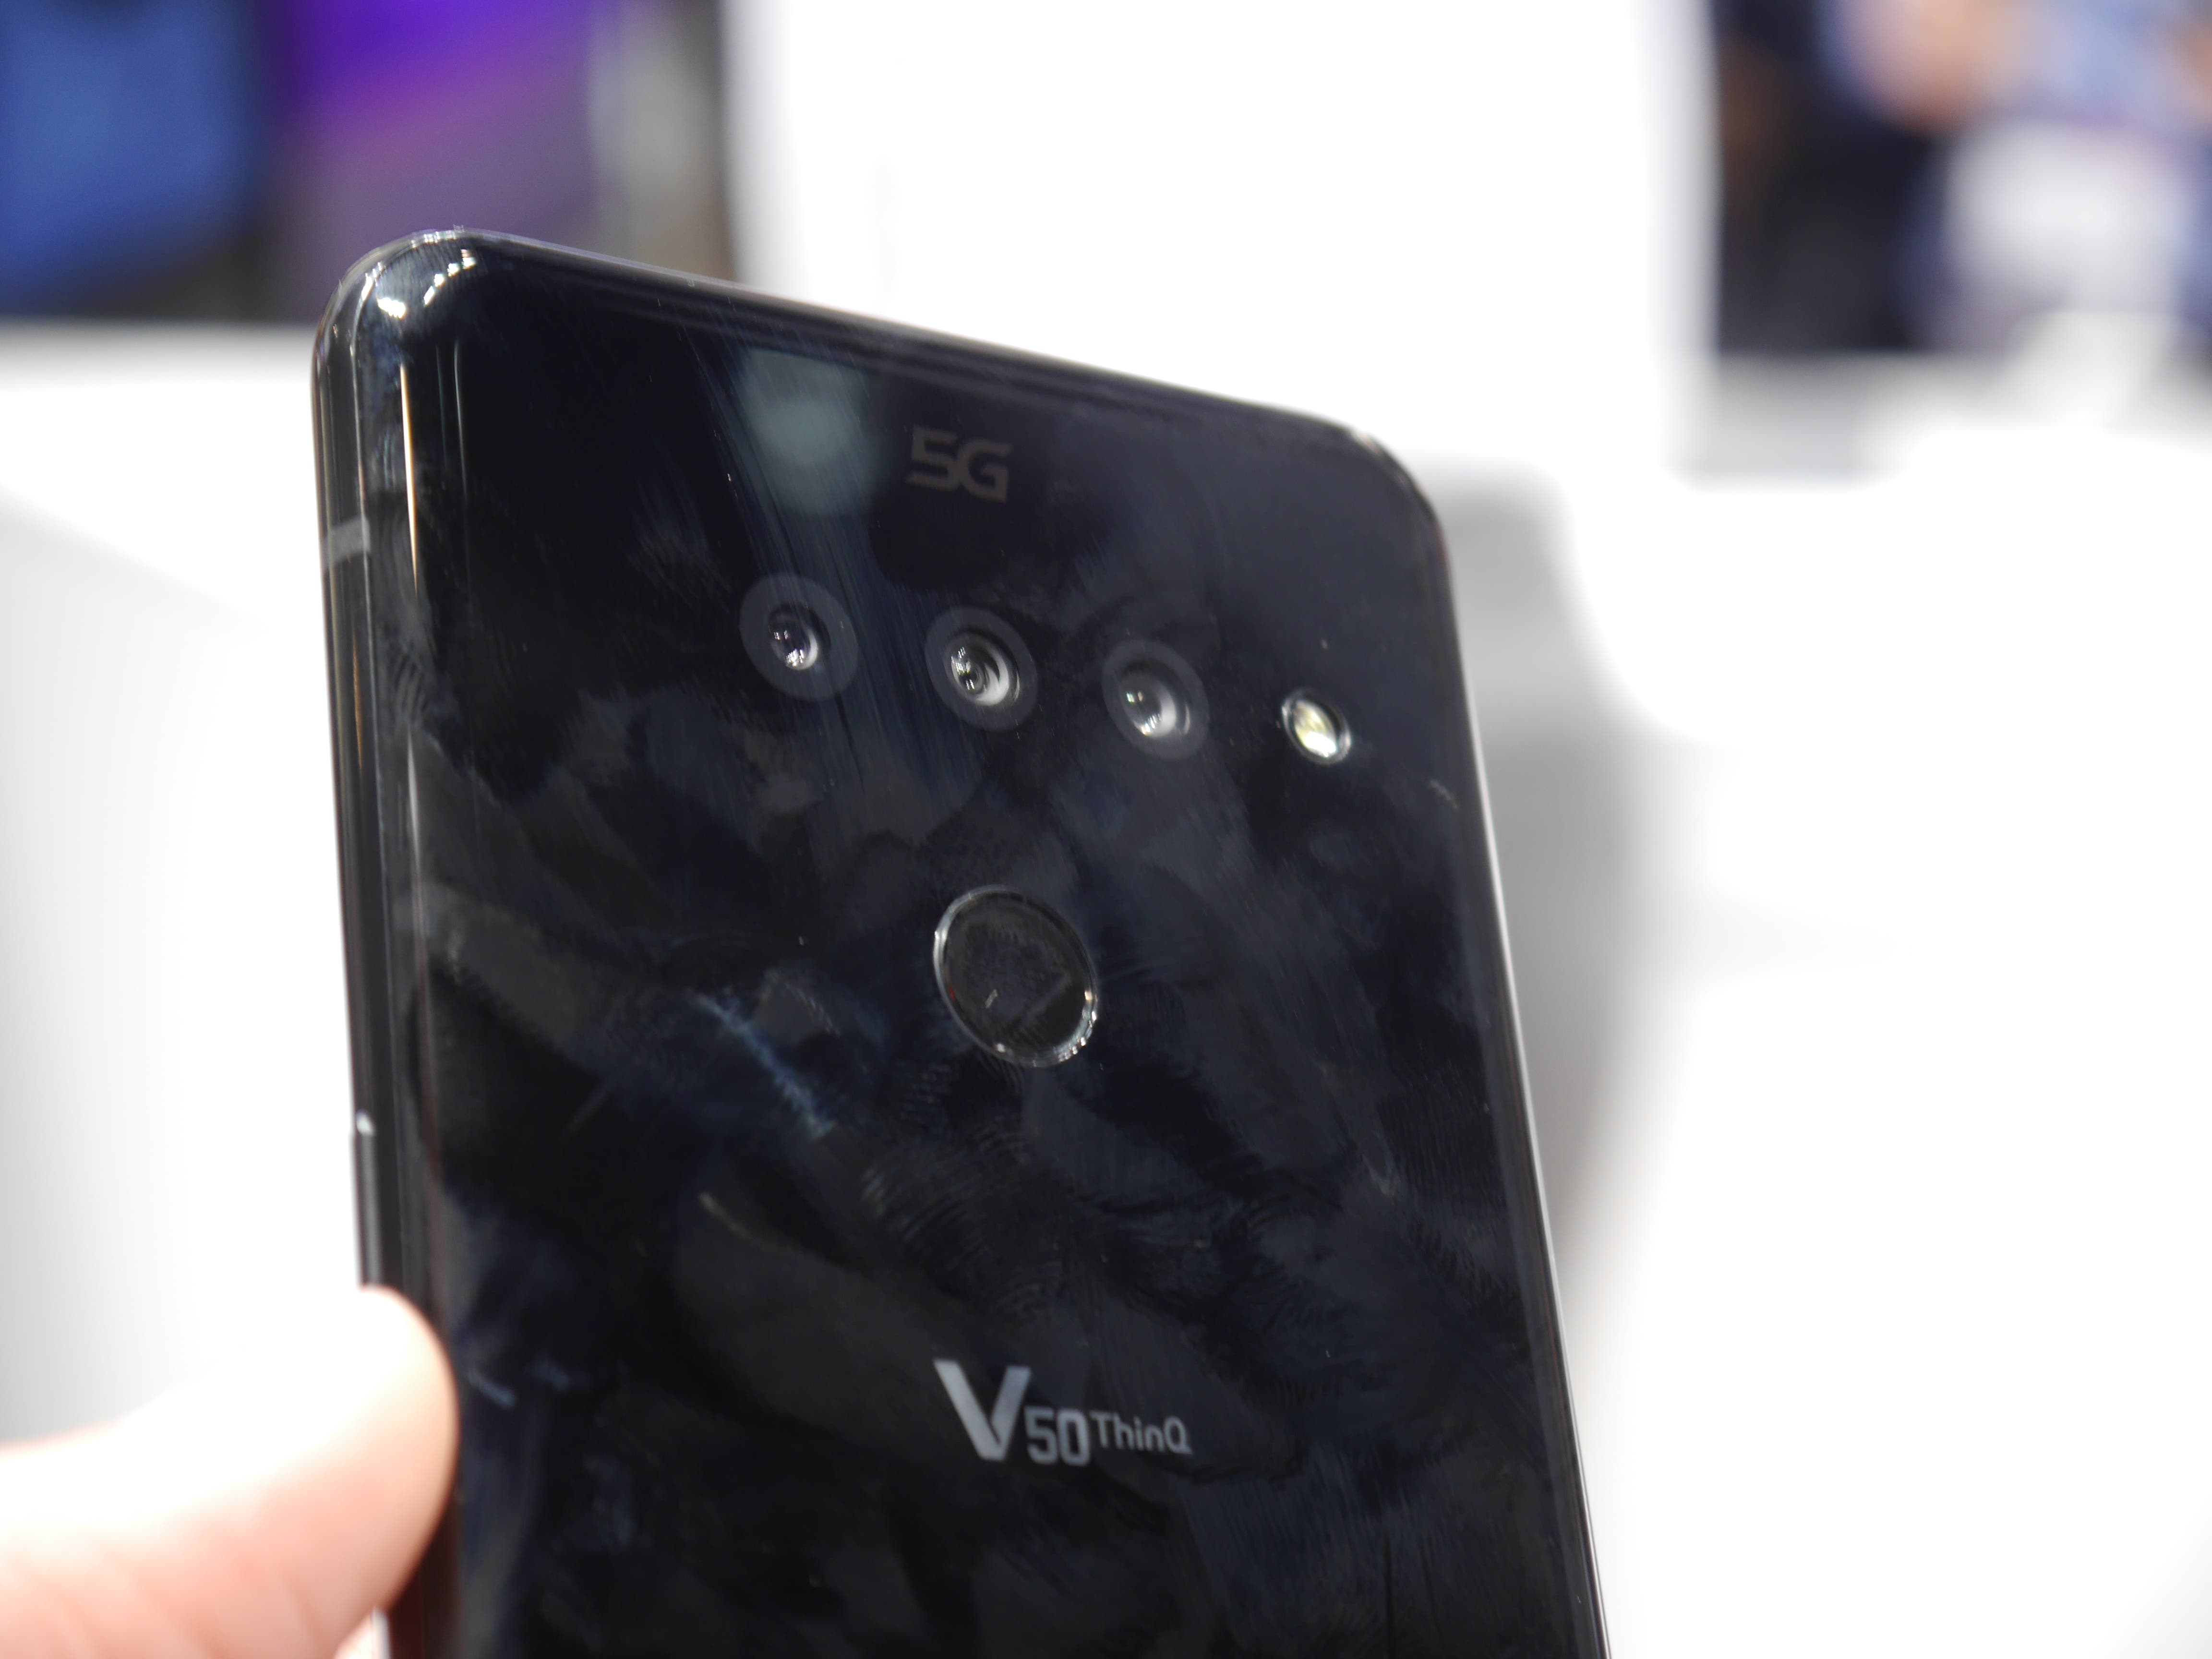 LG V50 ThinQ Hands-On